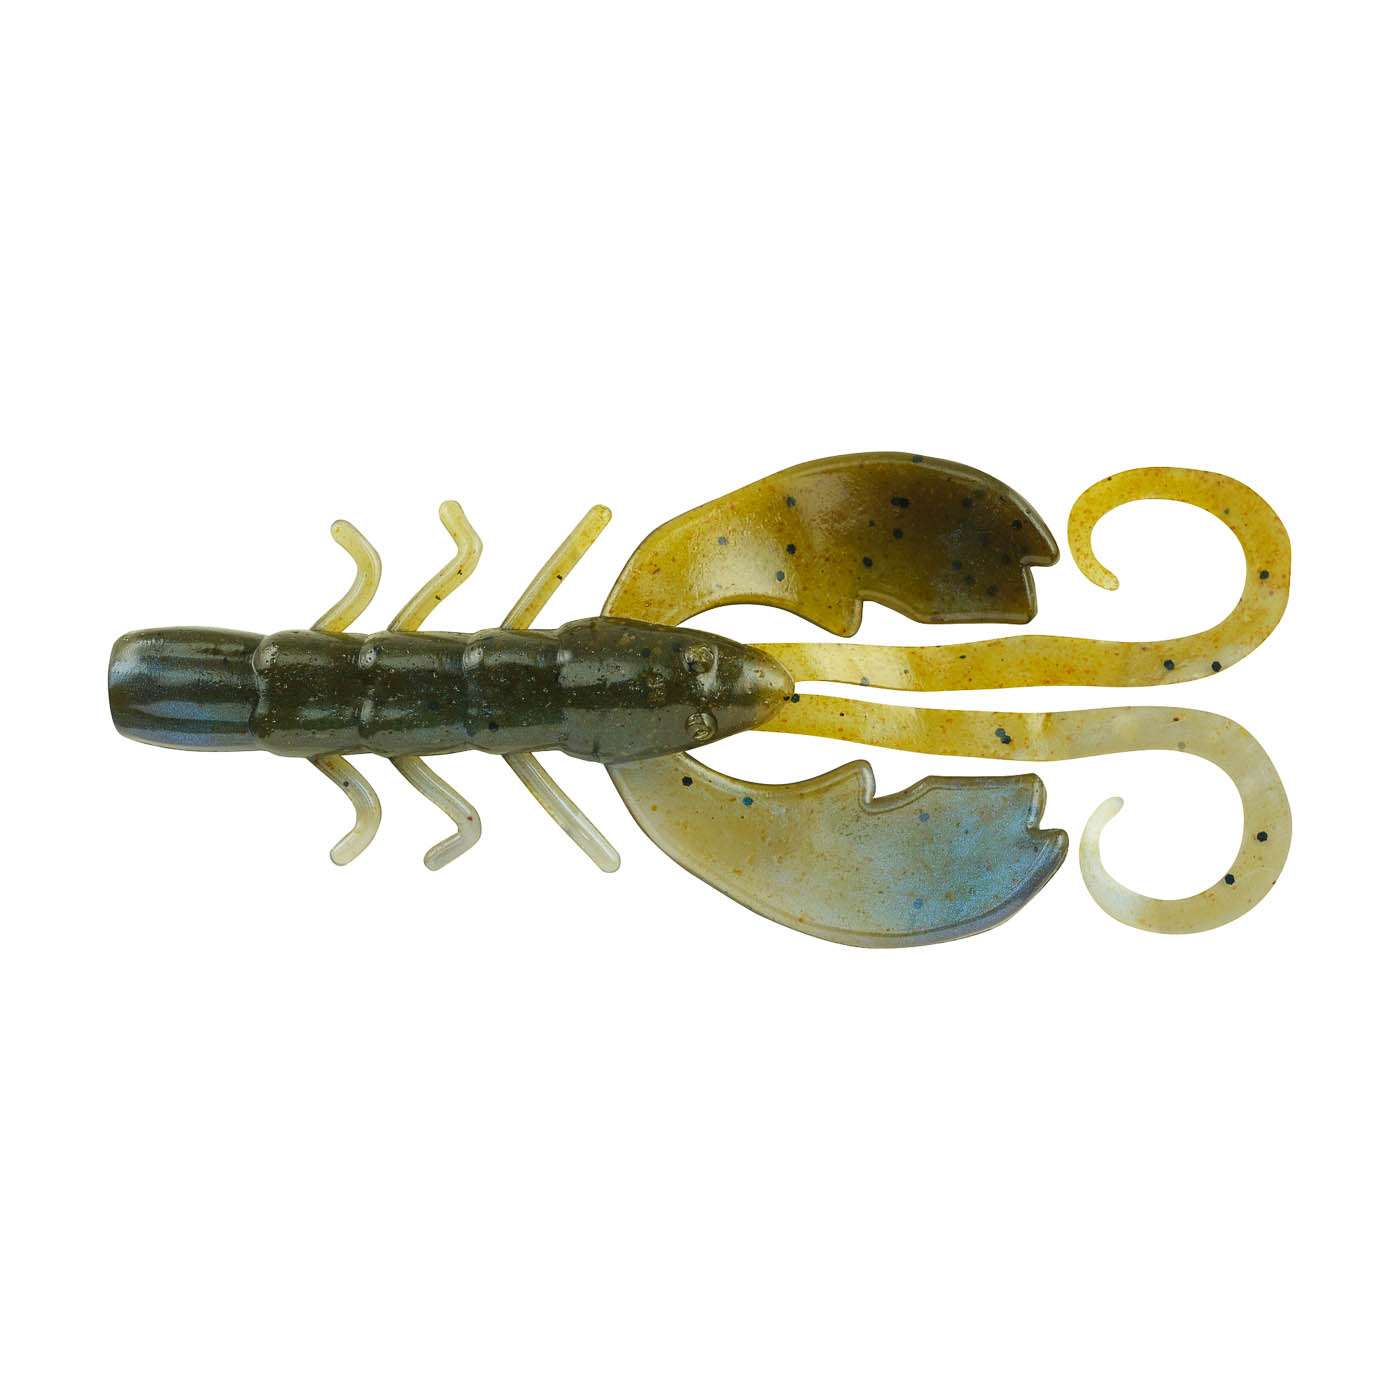 <p><strong>PowerBait Crazy Legs Chigger Craw</strong></p><p>This 2007 Bassmaster Classic winning lure just got even better. The Chigger Craw now comes with Crazy Legs that greatly enhance its action while swimming or on the drop. The pinchers and the new legs add to the action, while the PowerBait fish attractant adds even more strike appeal. Available in 3- or 4-inch models and 11 colors. $4.99. <a href=